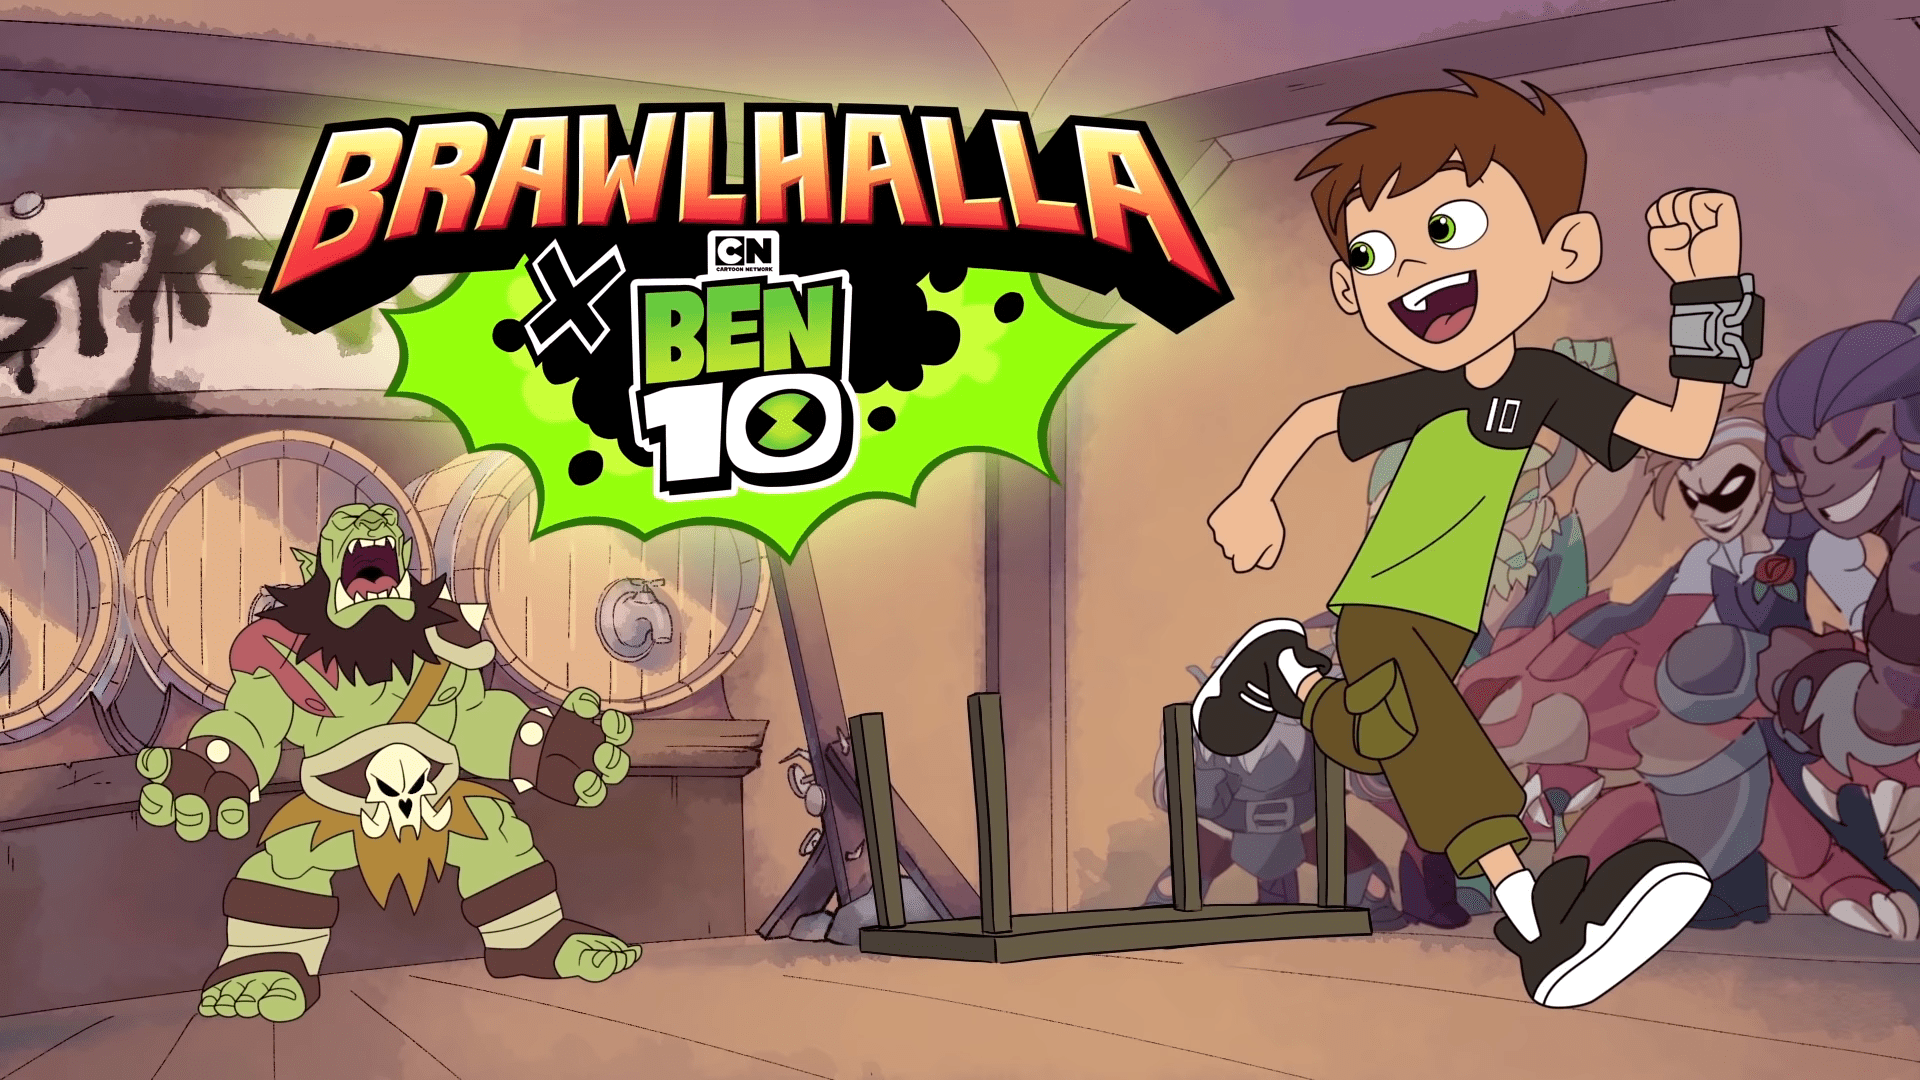 Cartoon Network's Ben 10 joins Brawlhalla in the newest crossover event